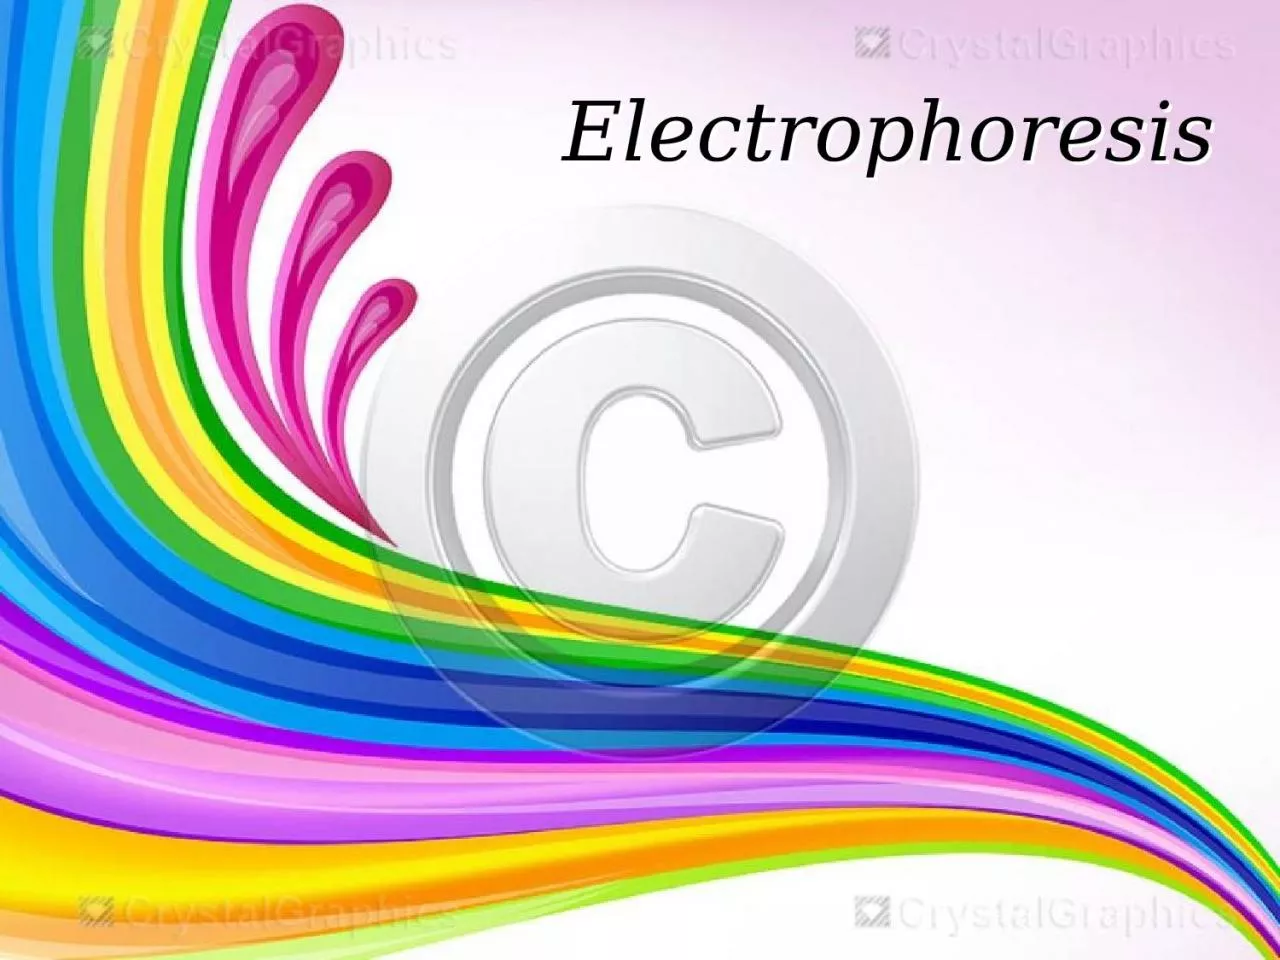 Electrophoresis Electrophoresis is one of the most important method for separating colloidal